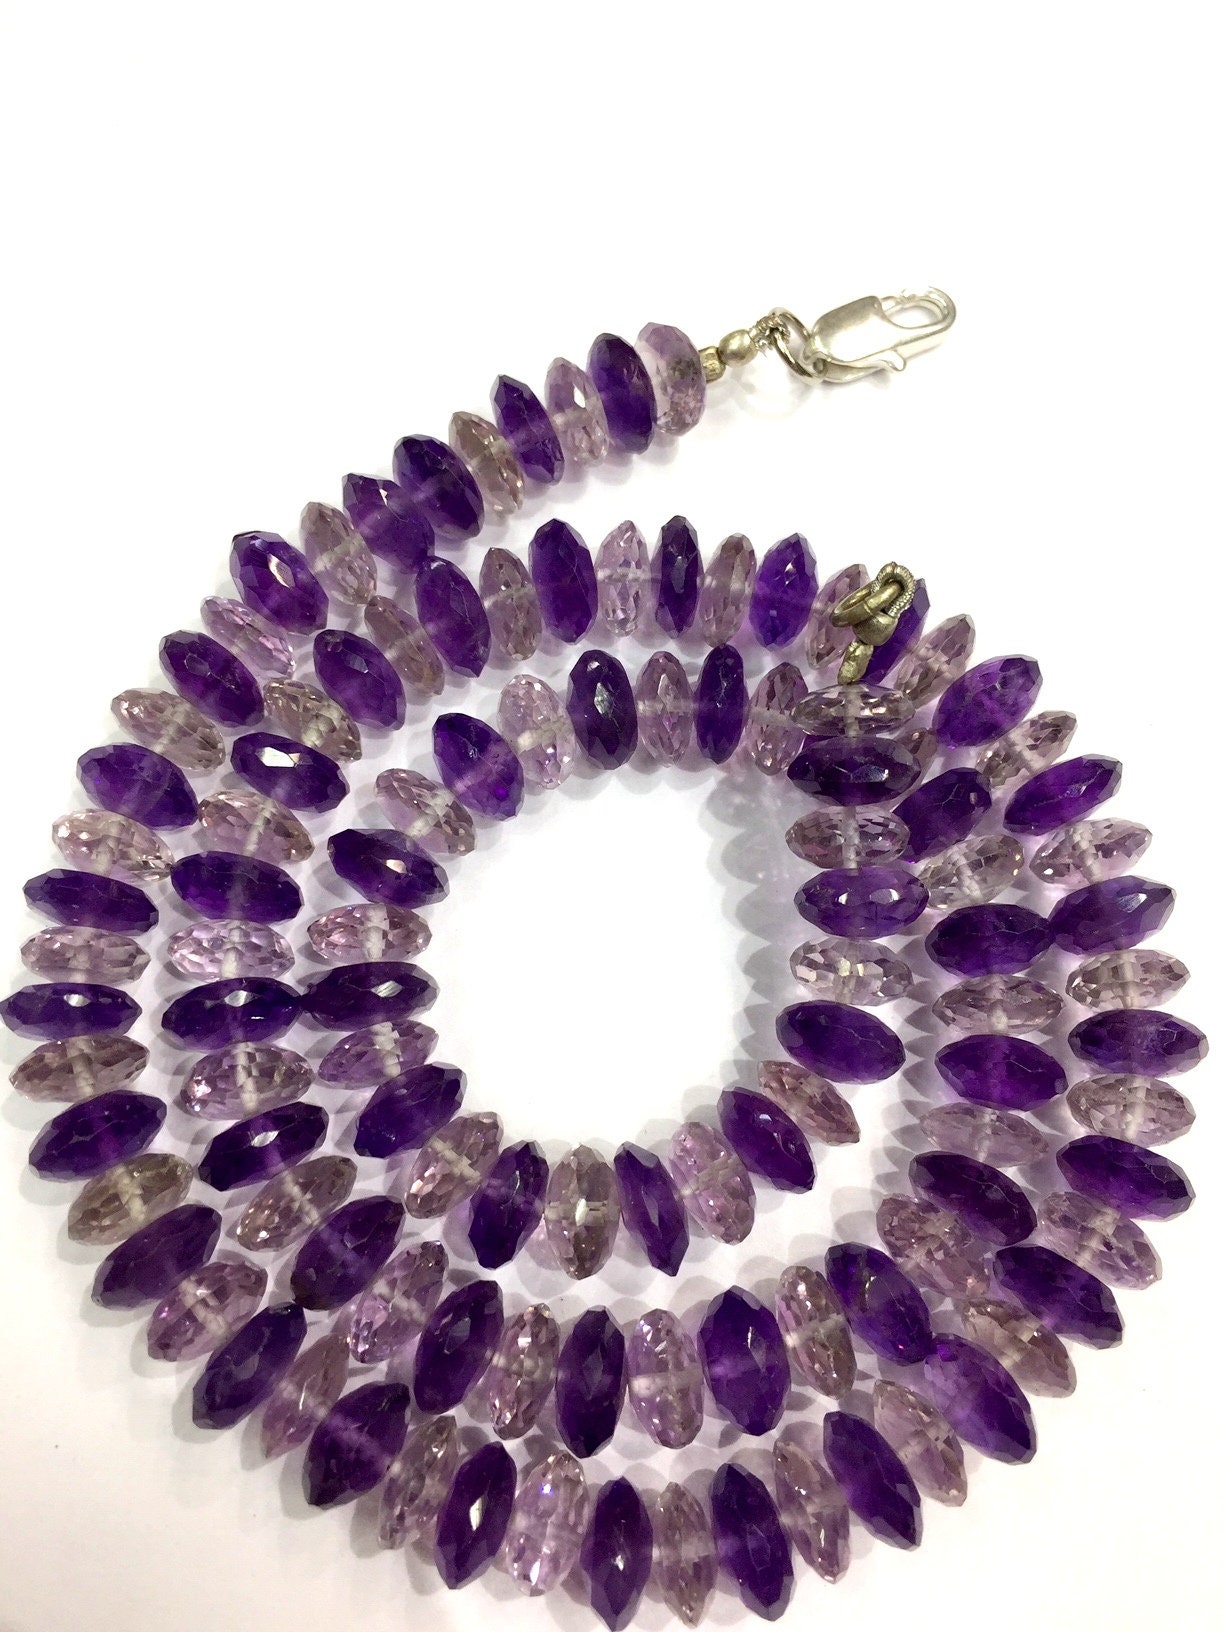 Superb Qualitynatural Amethyst Faceted Rondelle Beads | Etsy